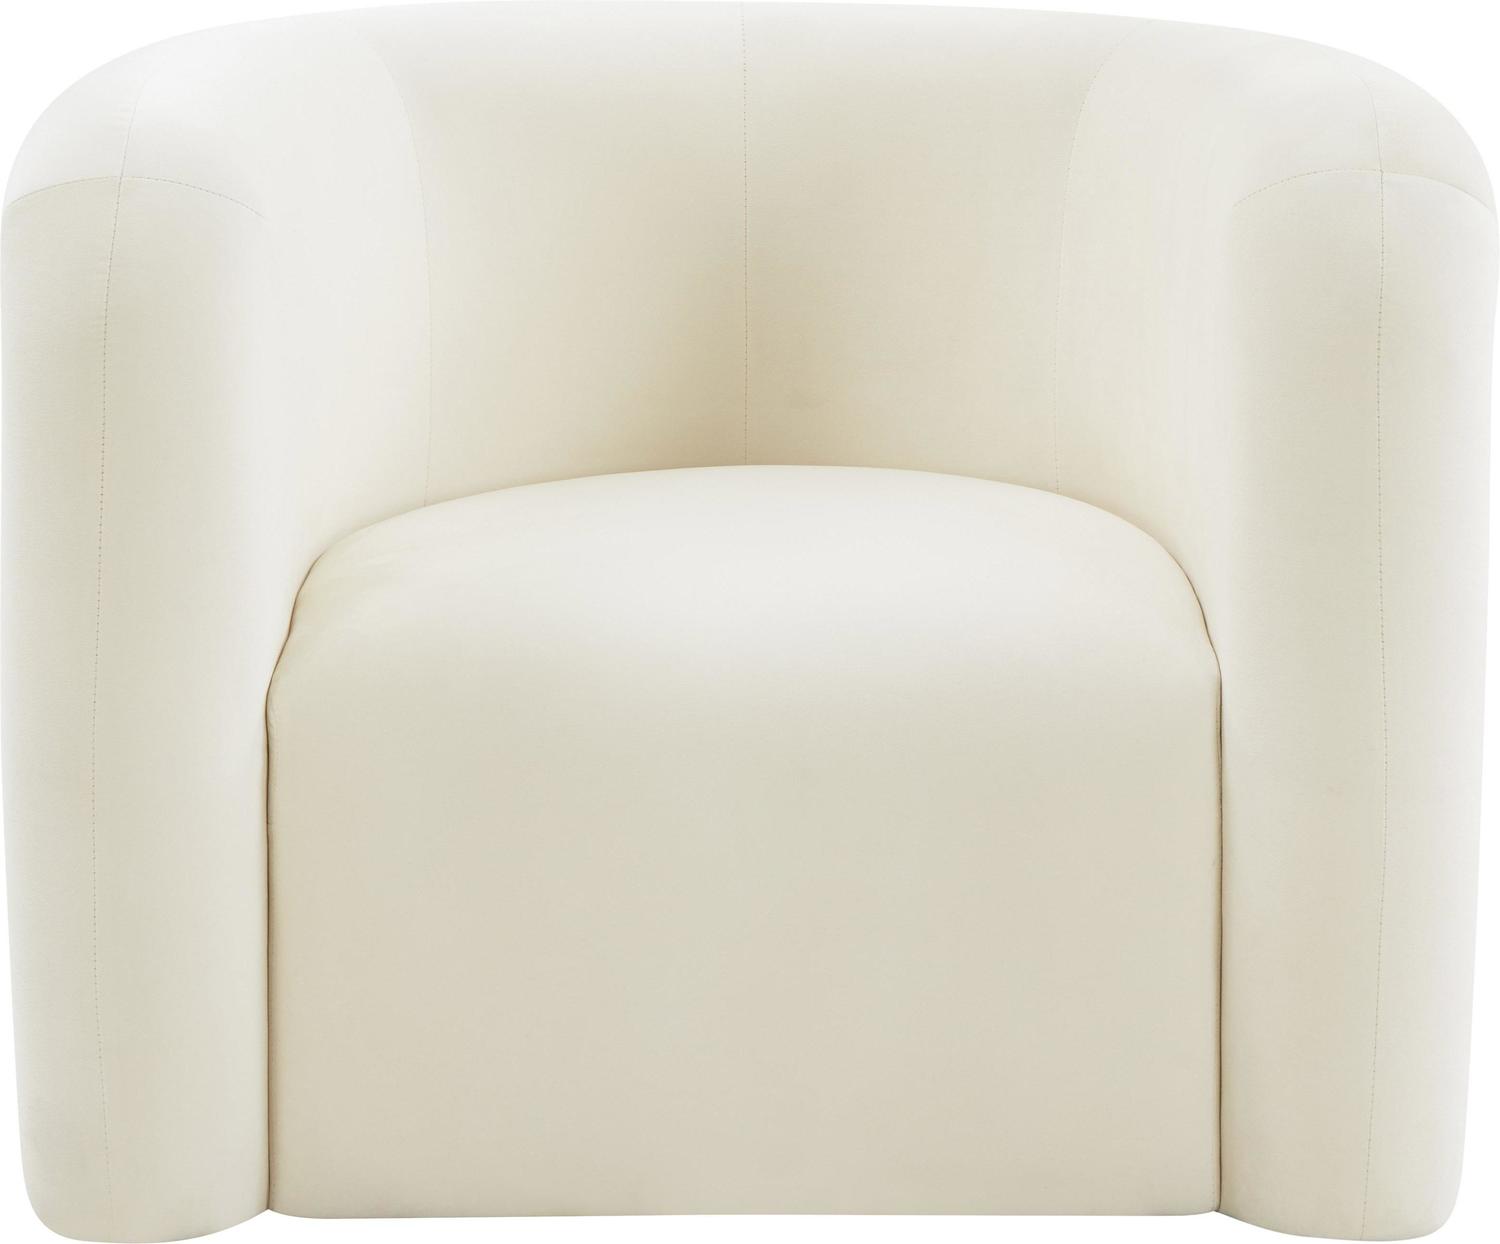 mid century modern lounge chair Contemporary Design Furniture Accent Chairs Cream